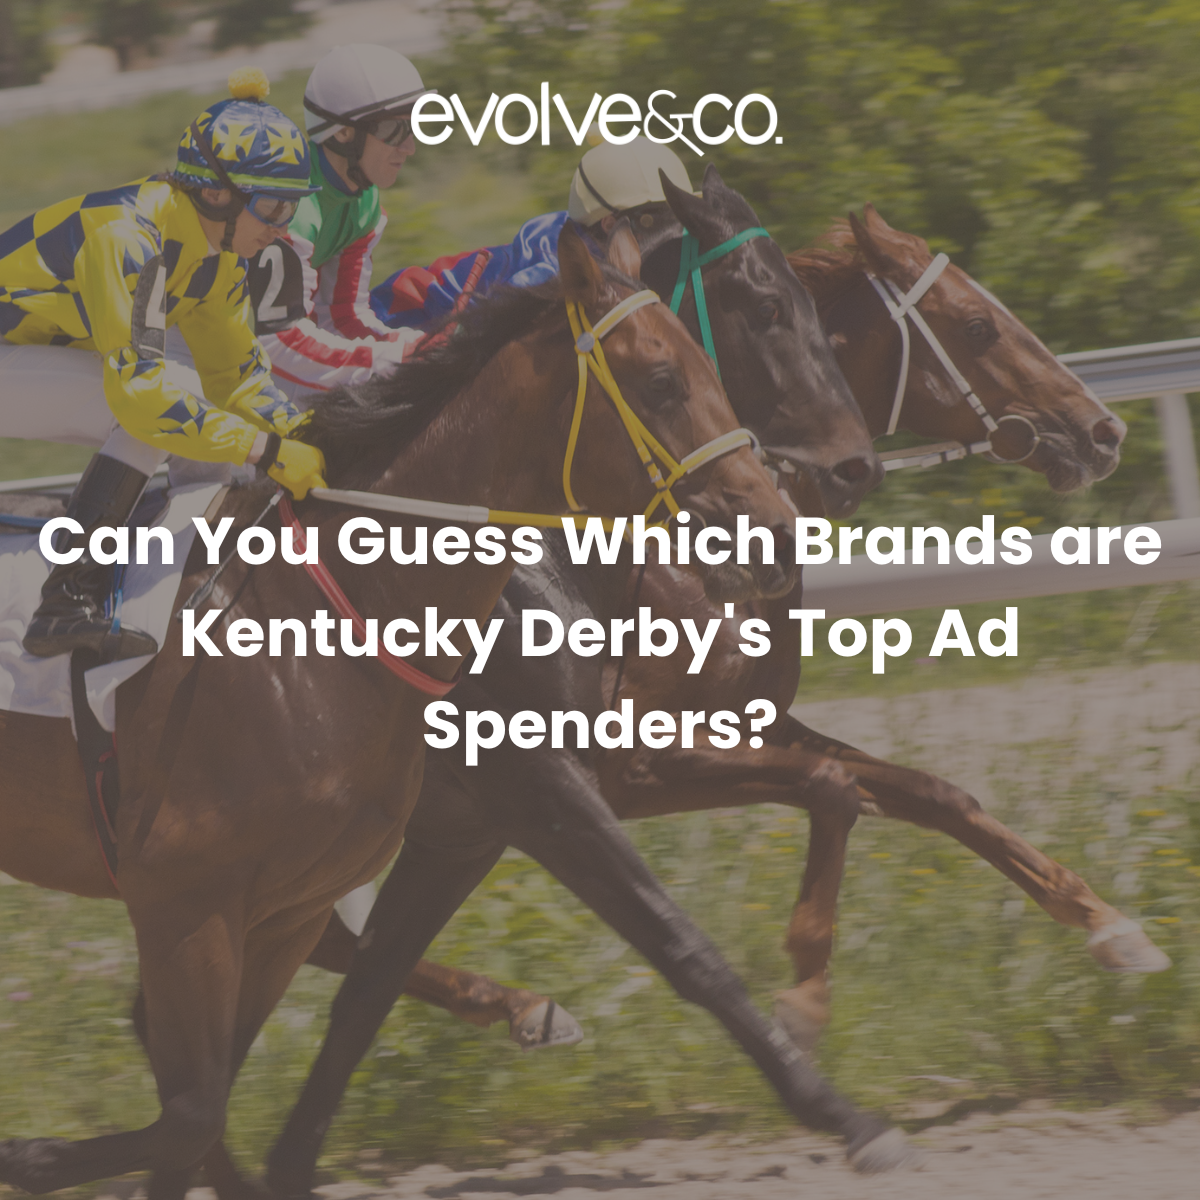 Can You Guess Which Brands are Kentucky Derby’s Top Ad Spenders?